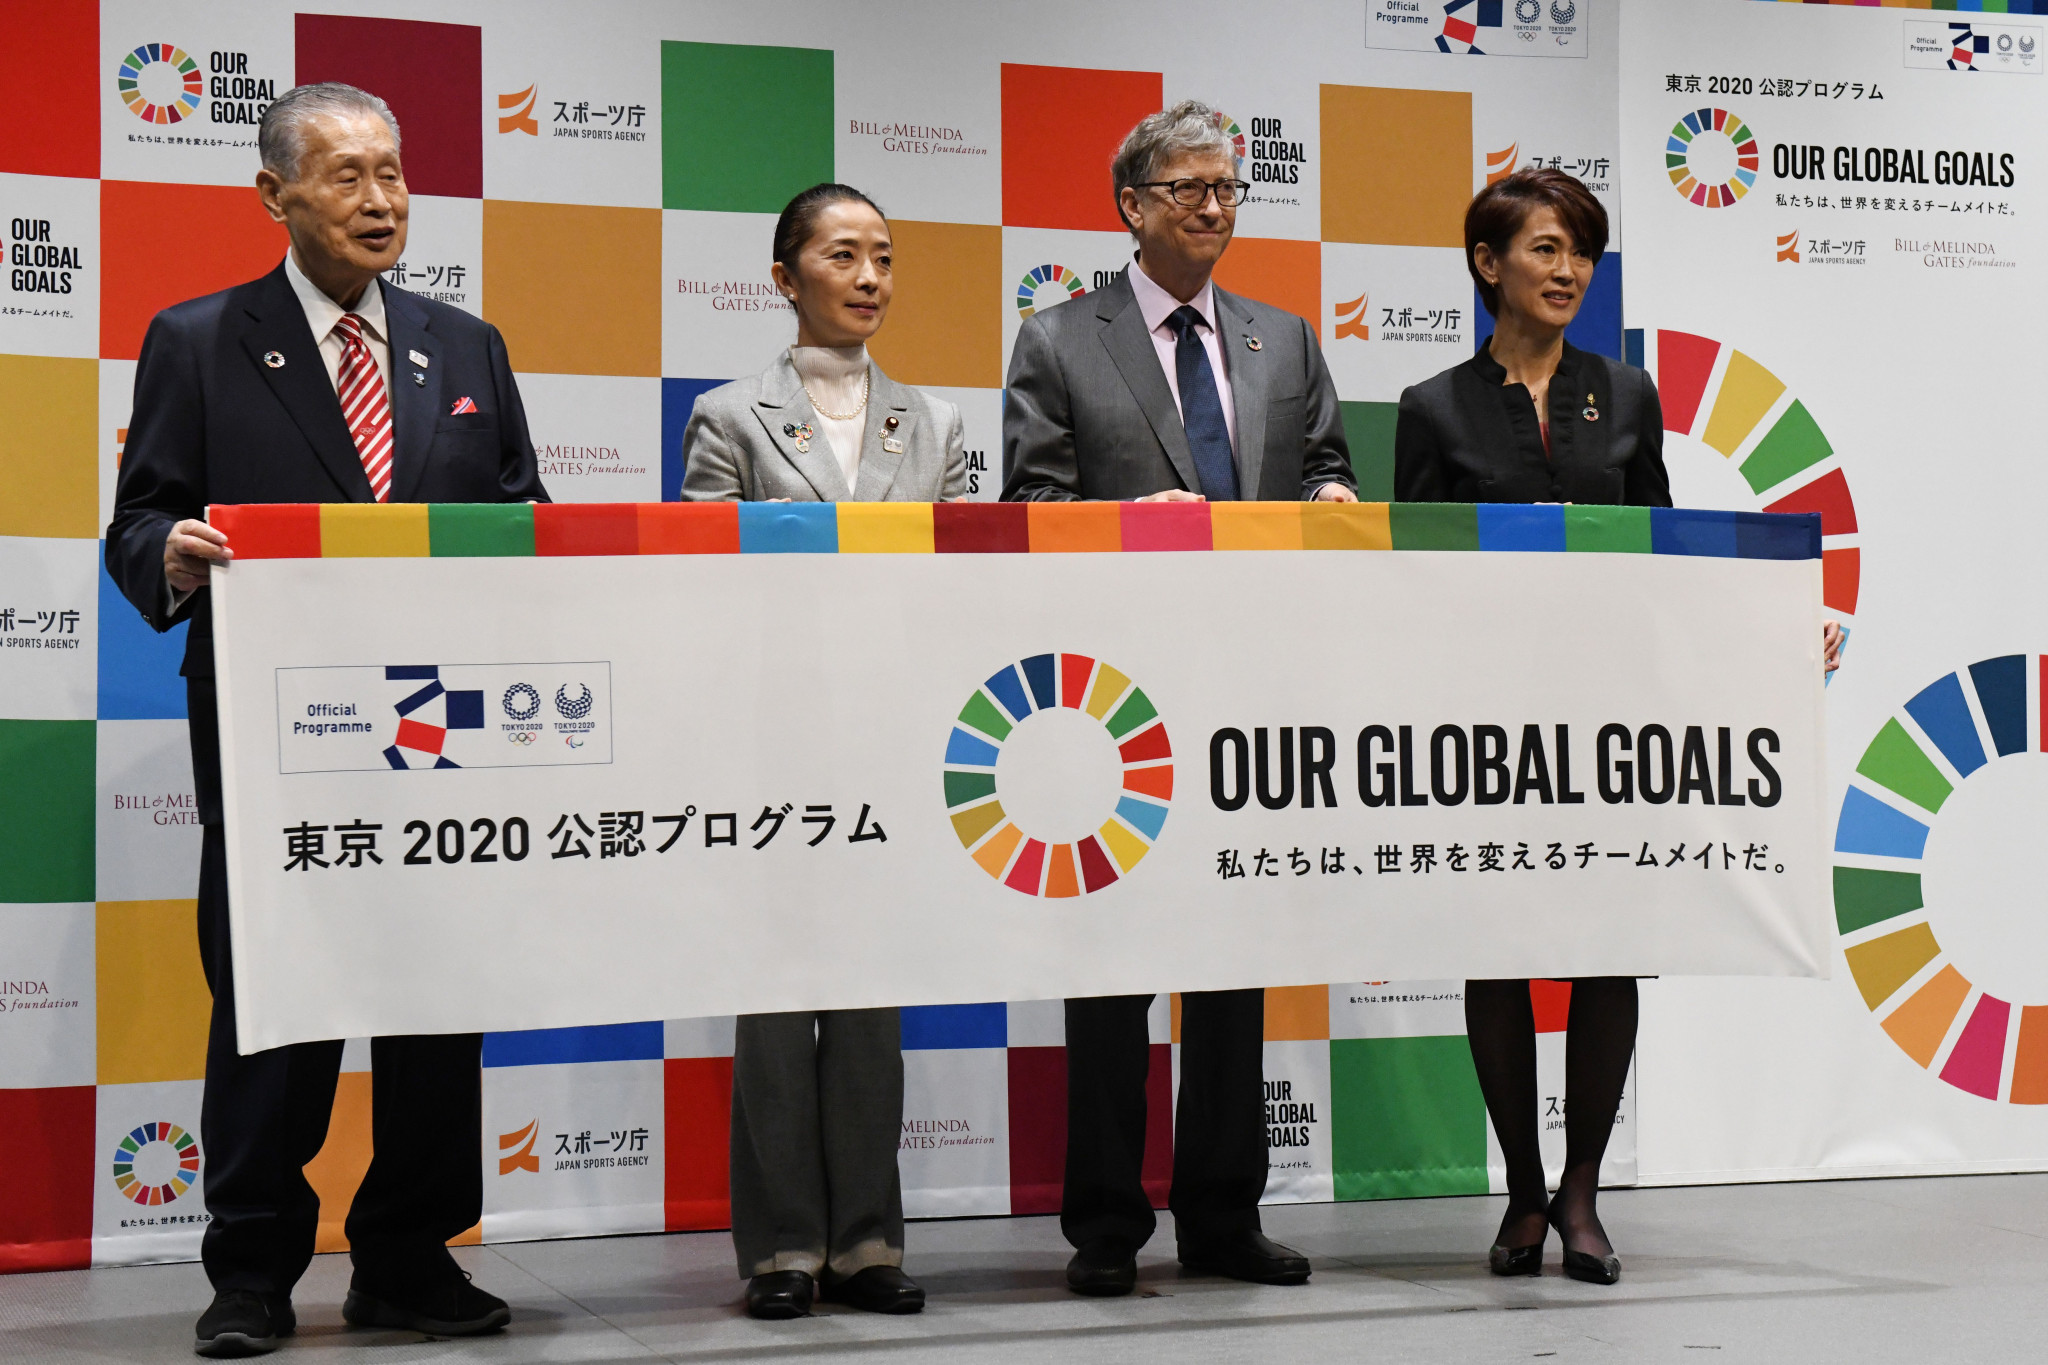 Tokyo 2020 President Yoshiro Mori joined Bill Gates to announce the partnership ©Getty Images